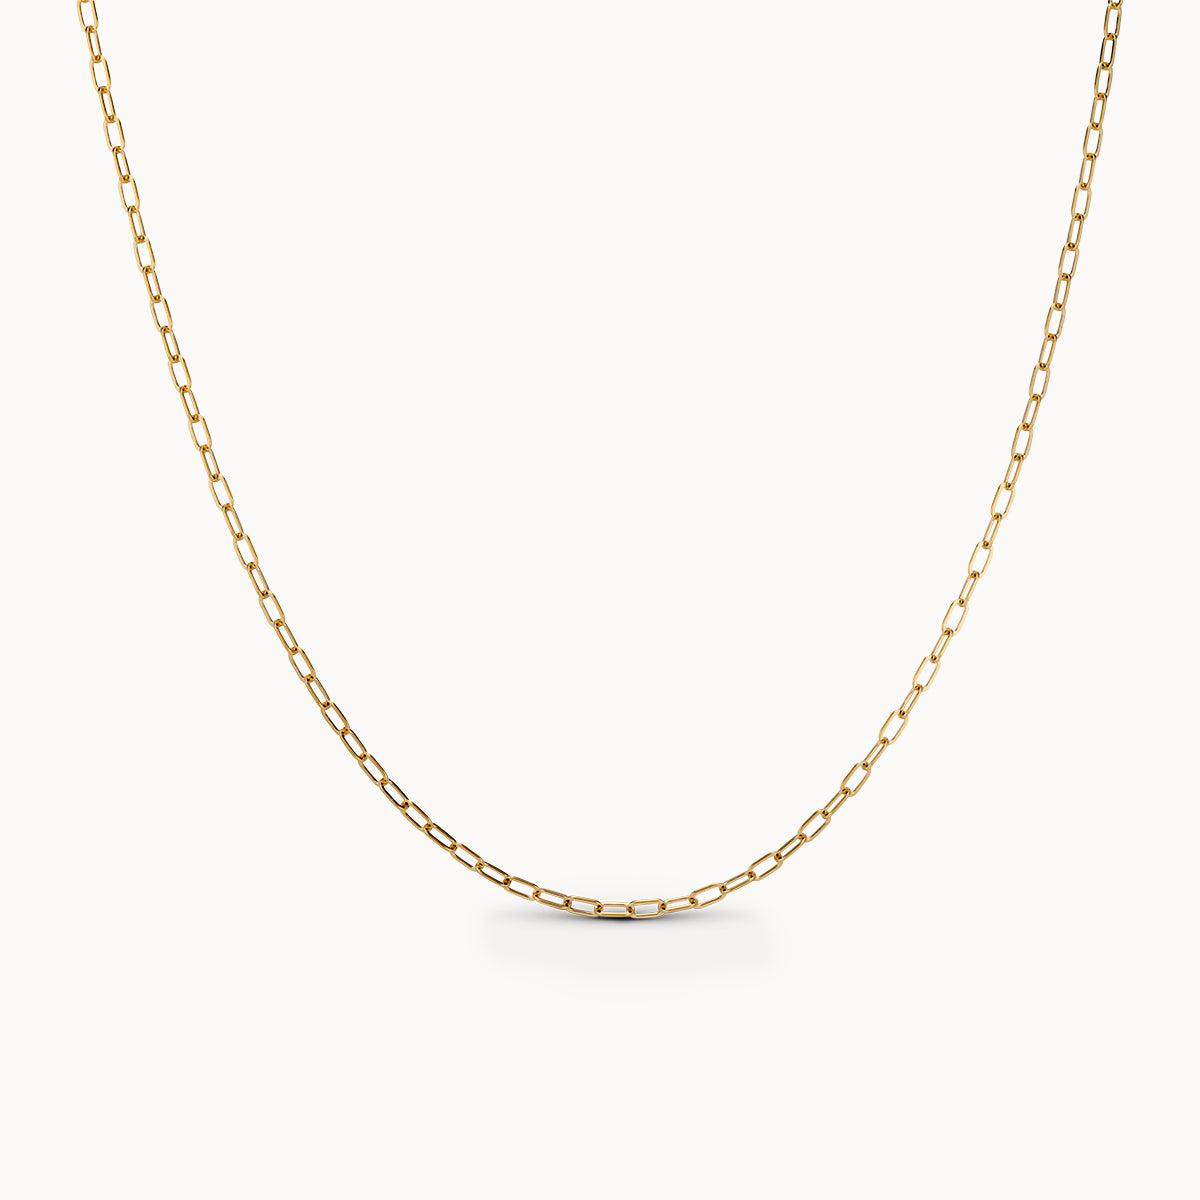 Small Paperclip Chain 18” Hypoallergenic Necklace | Rowan